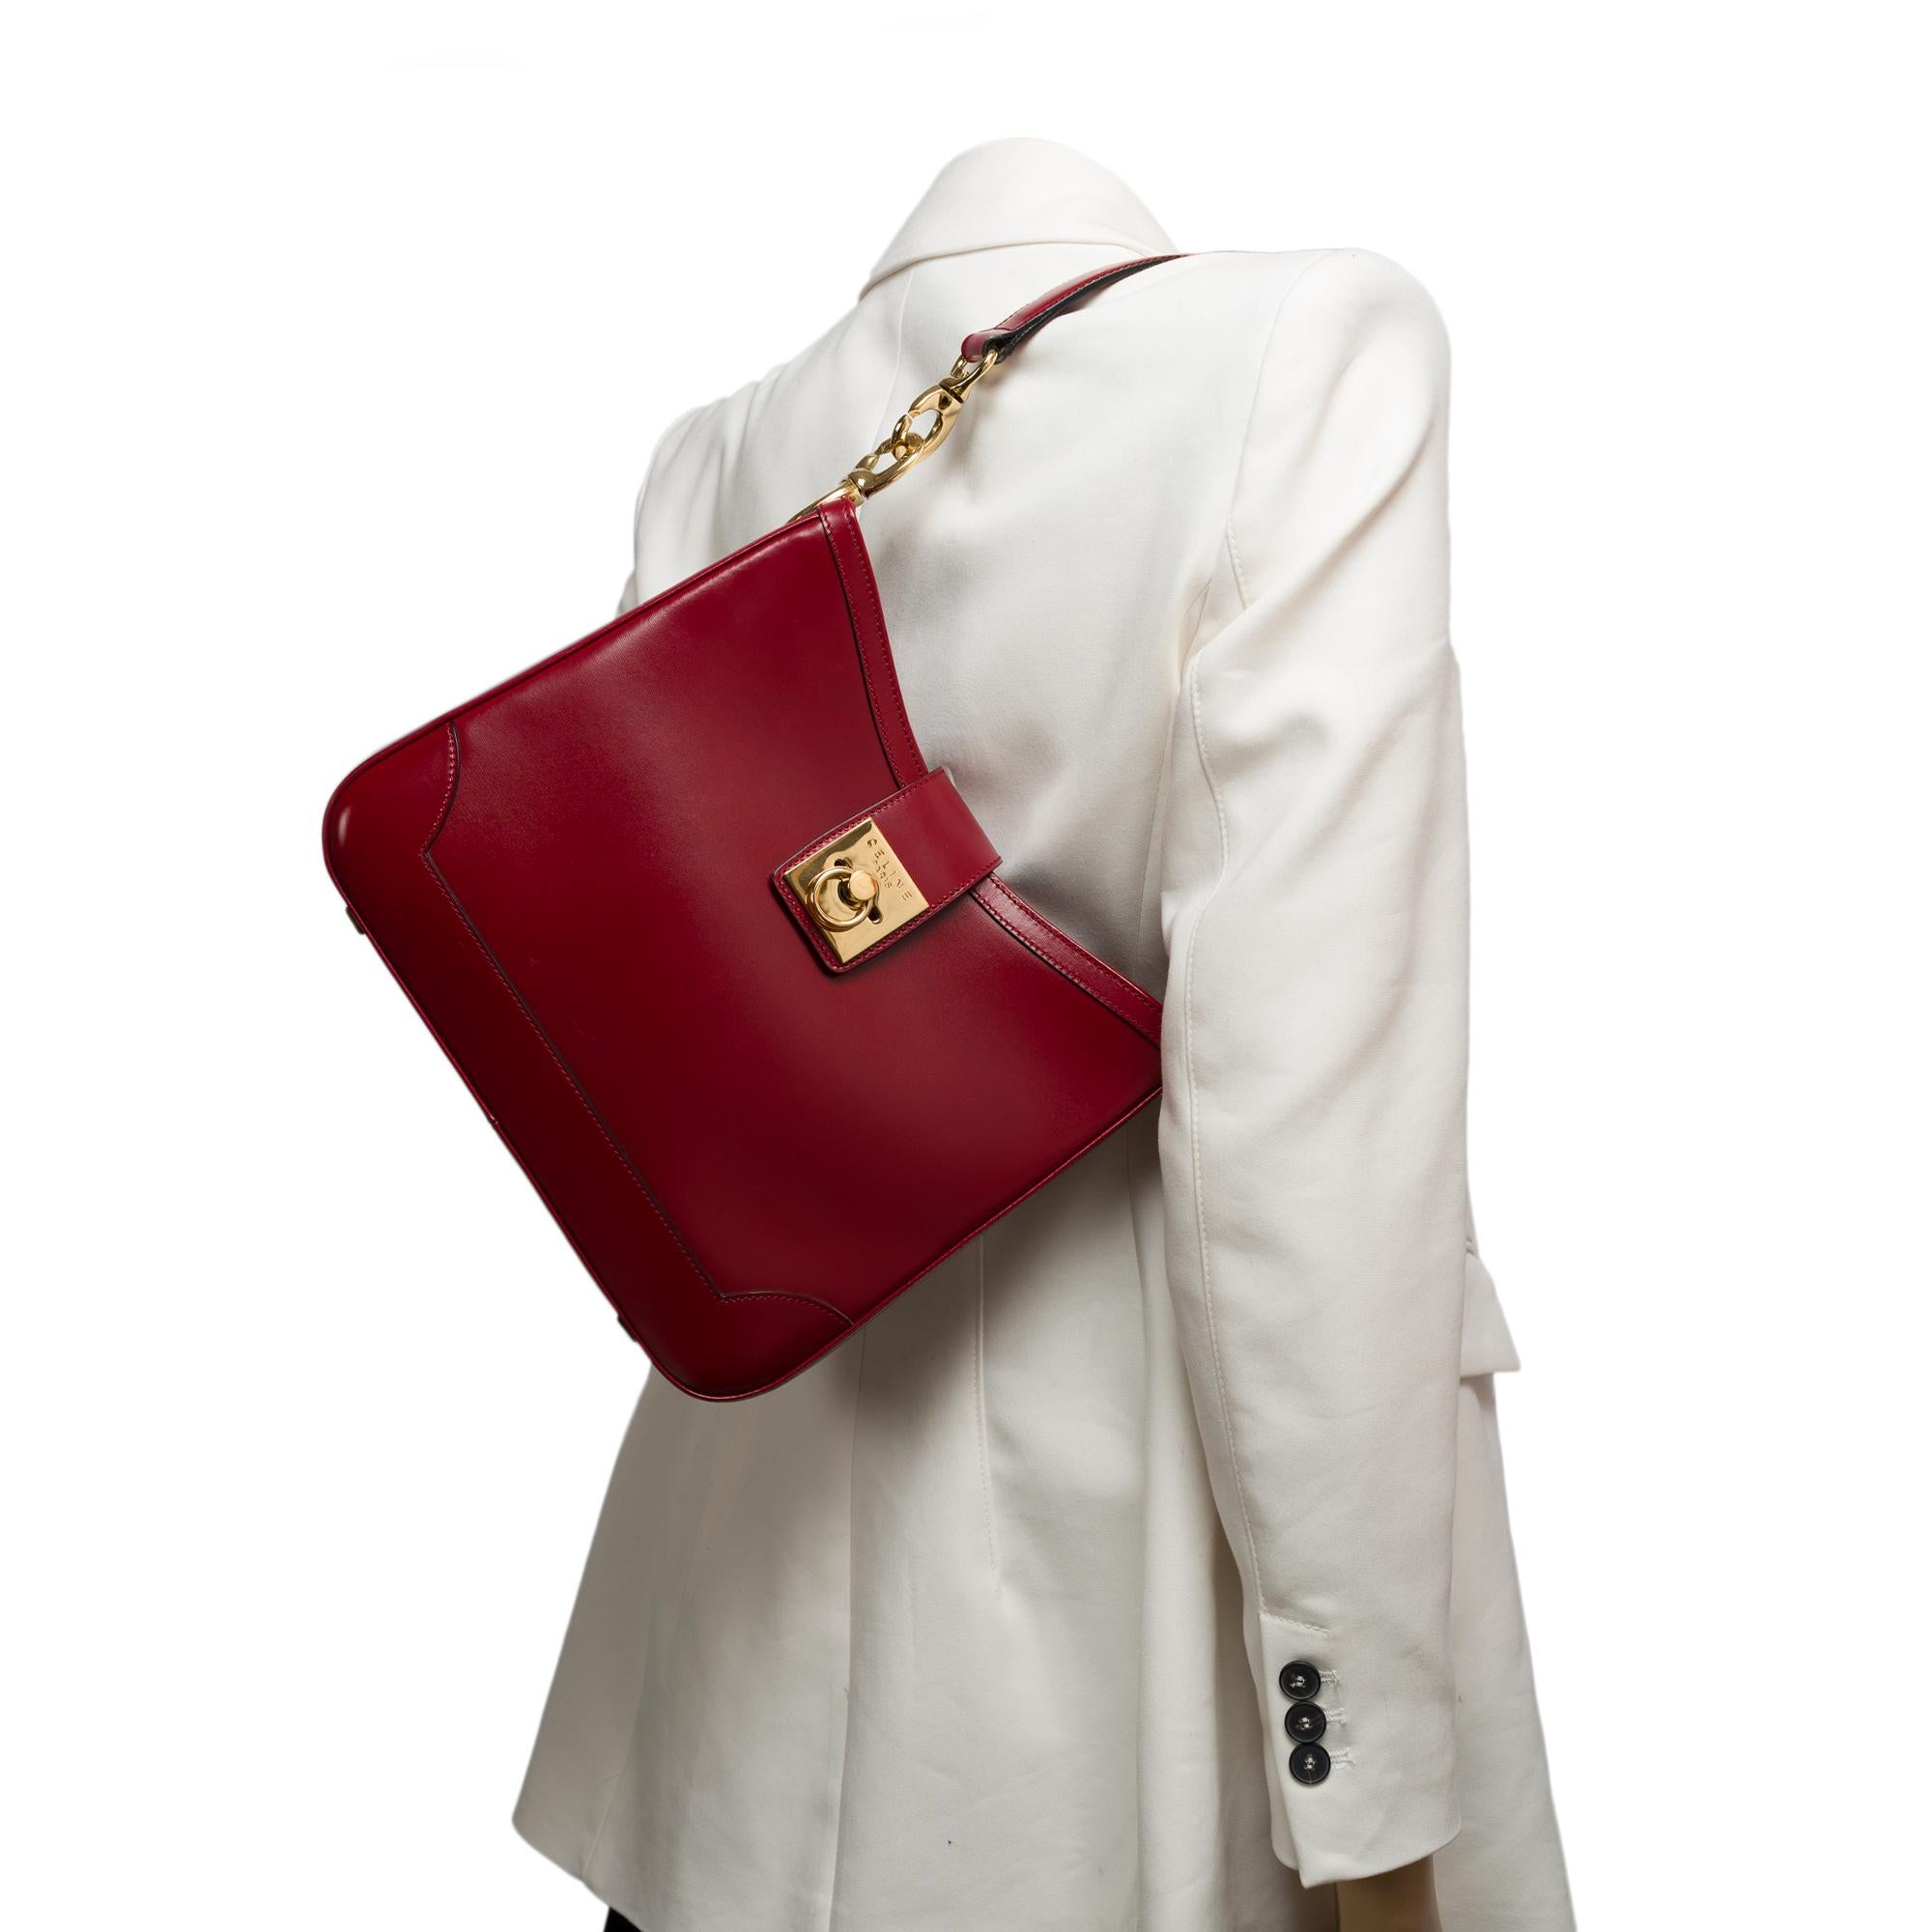 Gorgeous Celine vintage Tote bag in red cherry box calf, GHW For Sale 7